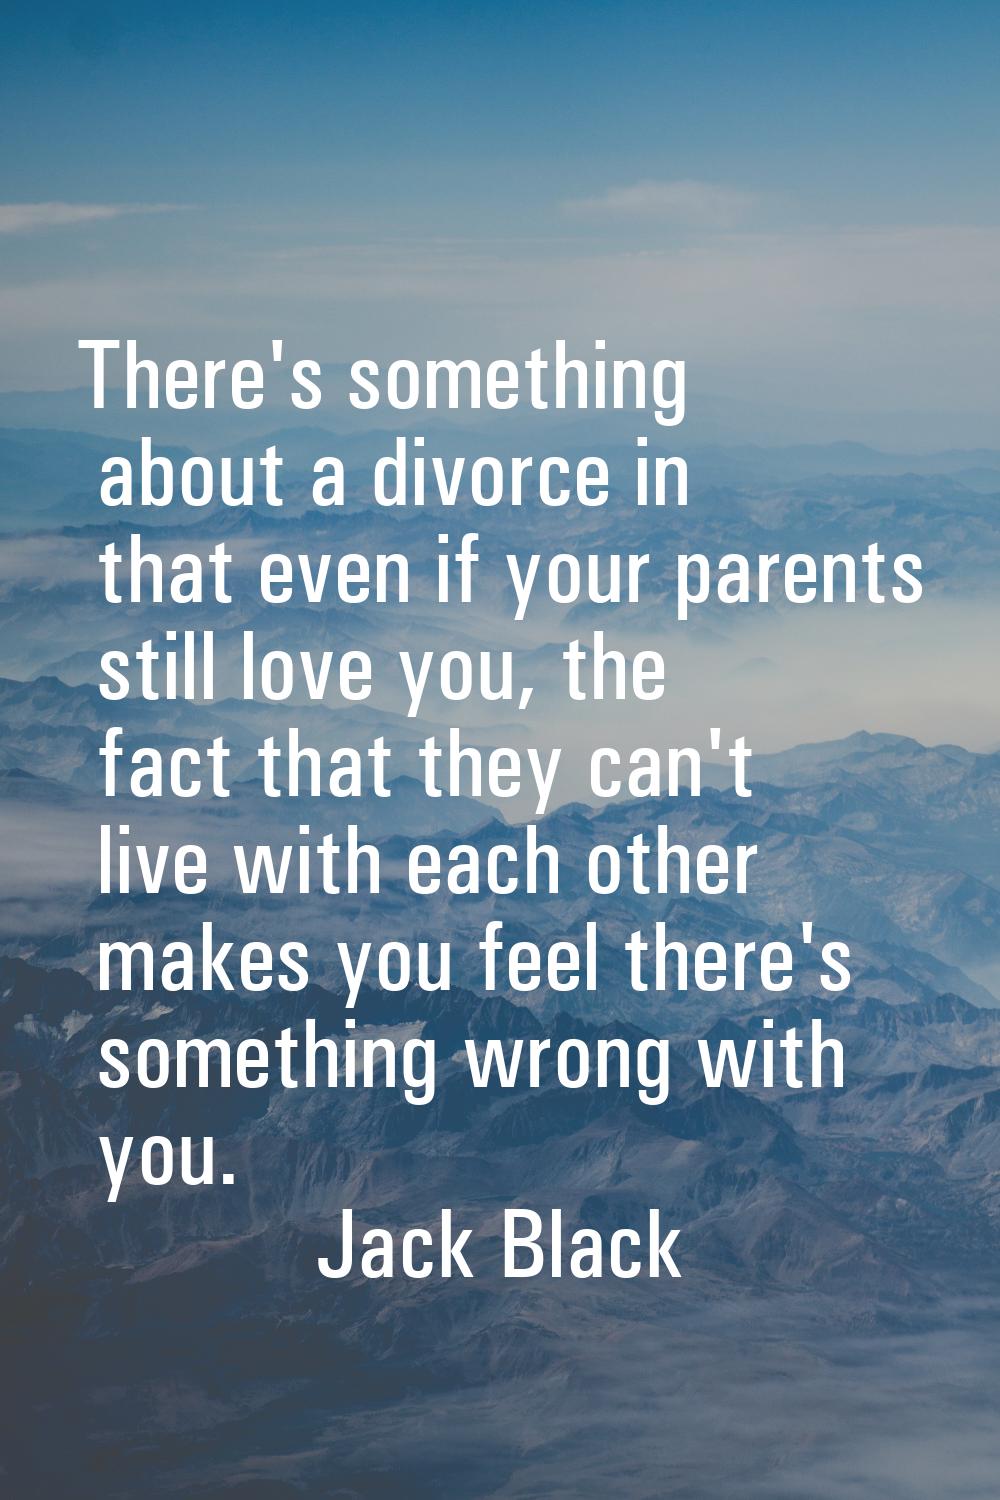 There's something about a divorce in that even if your parents still love you, the fact that they c